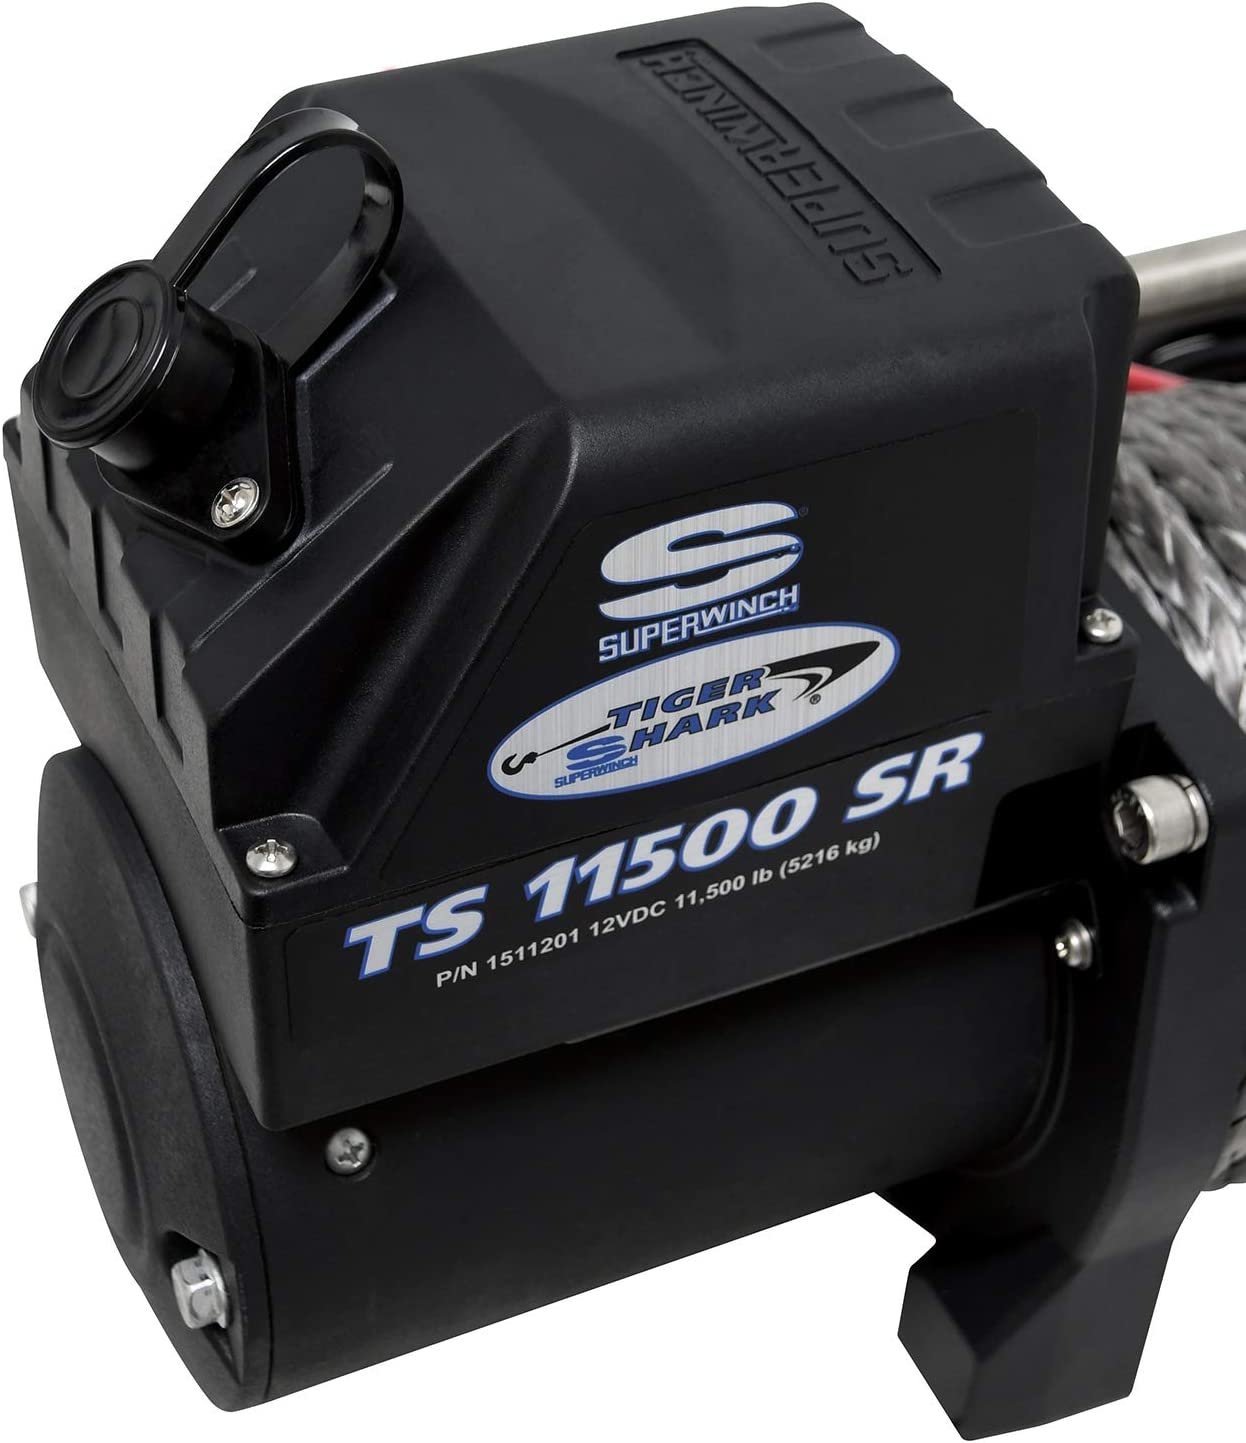 Superwinch Tiger Shark 11500SR 12V Synthetic Rope Winch - 1511201